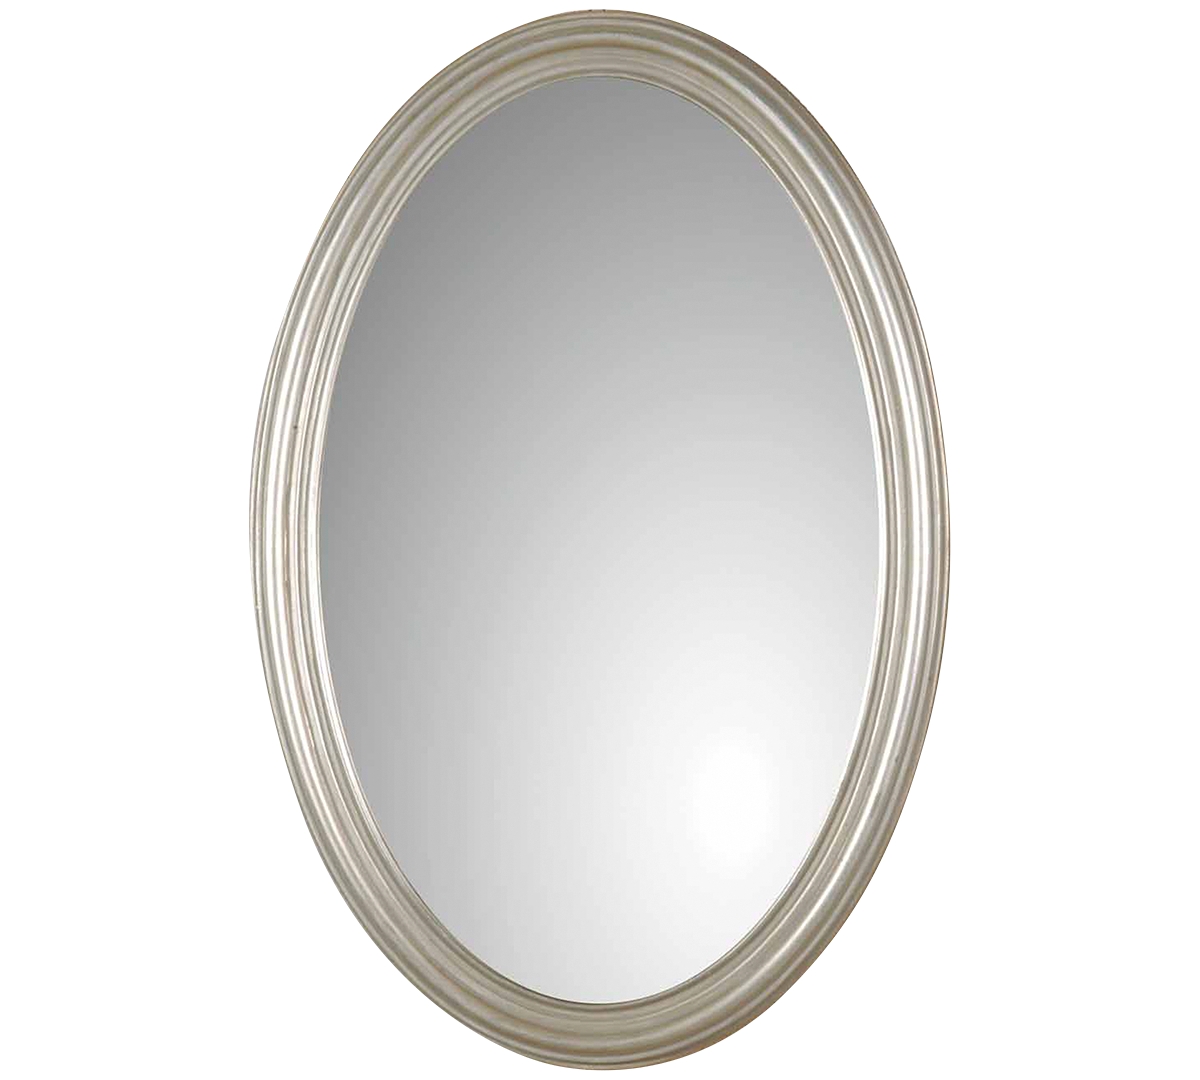 UPC 792977000205 product image for Uttermost Franklin Oval Silver Mirror | upcitemdb.com